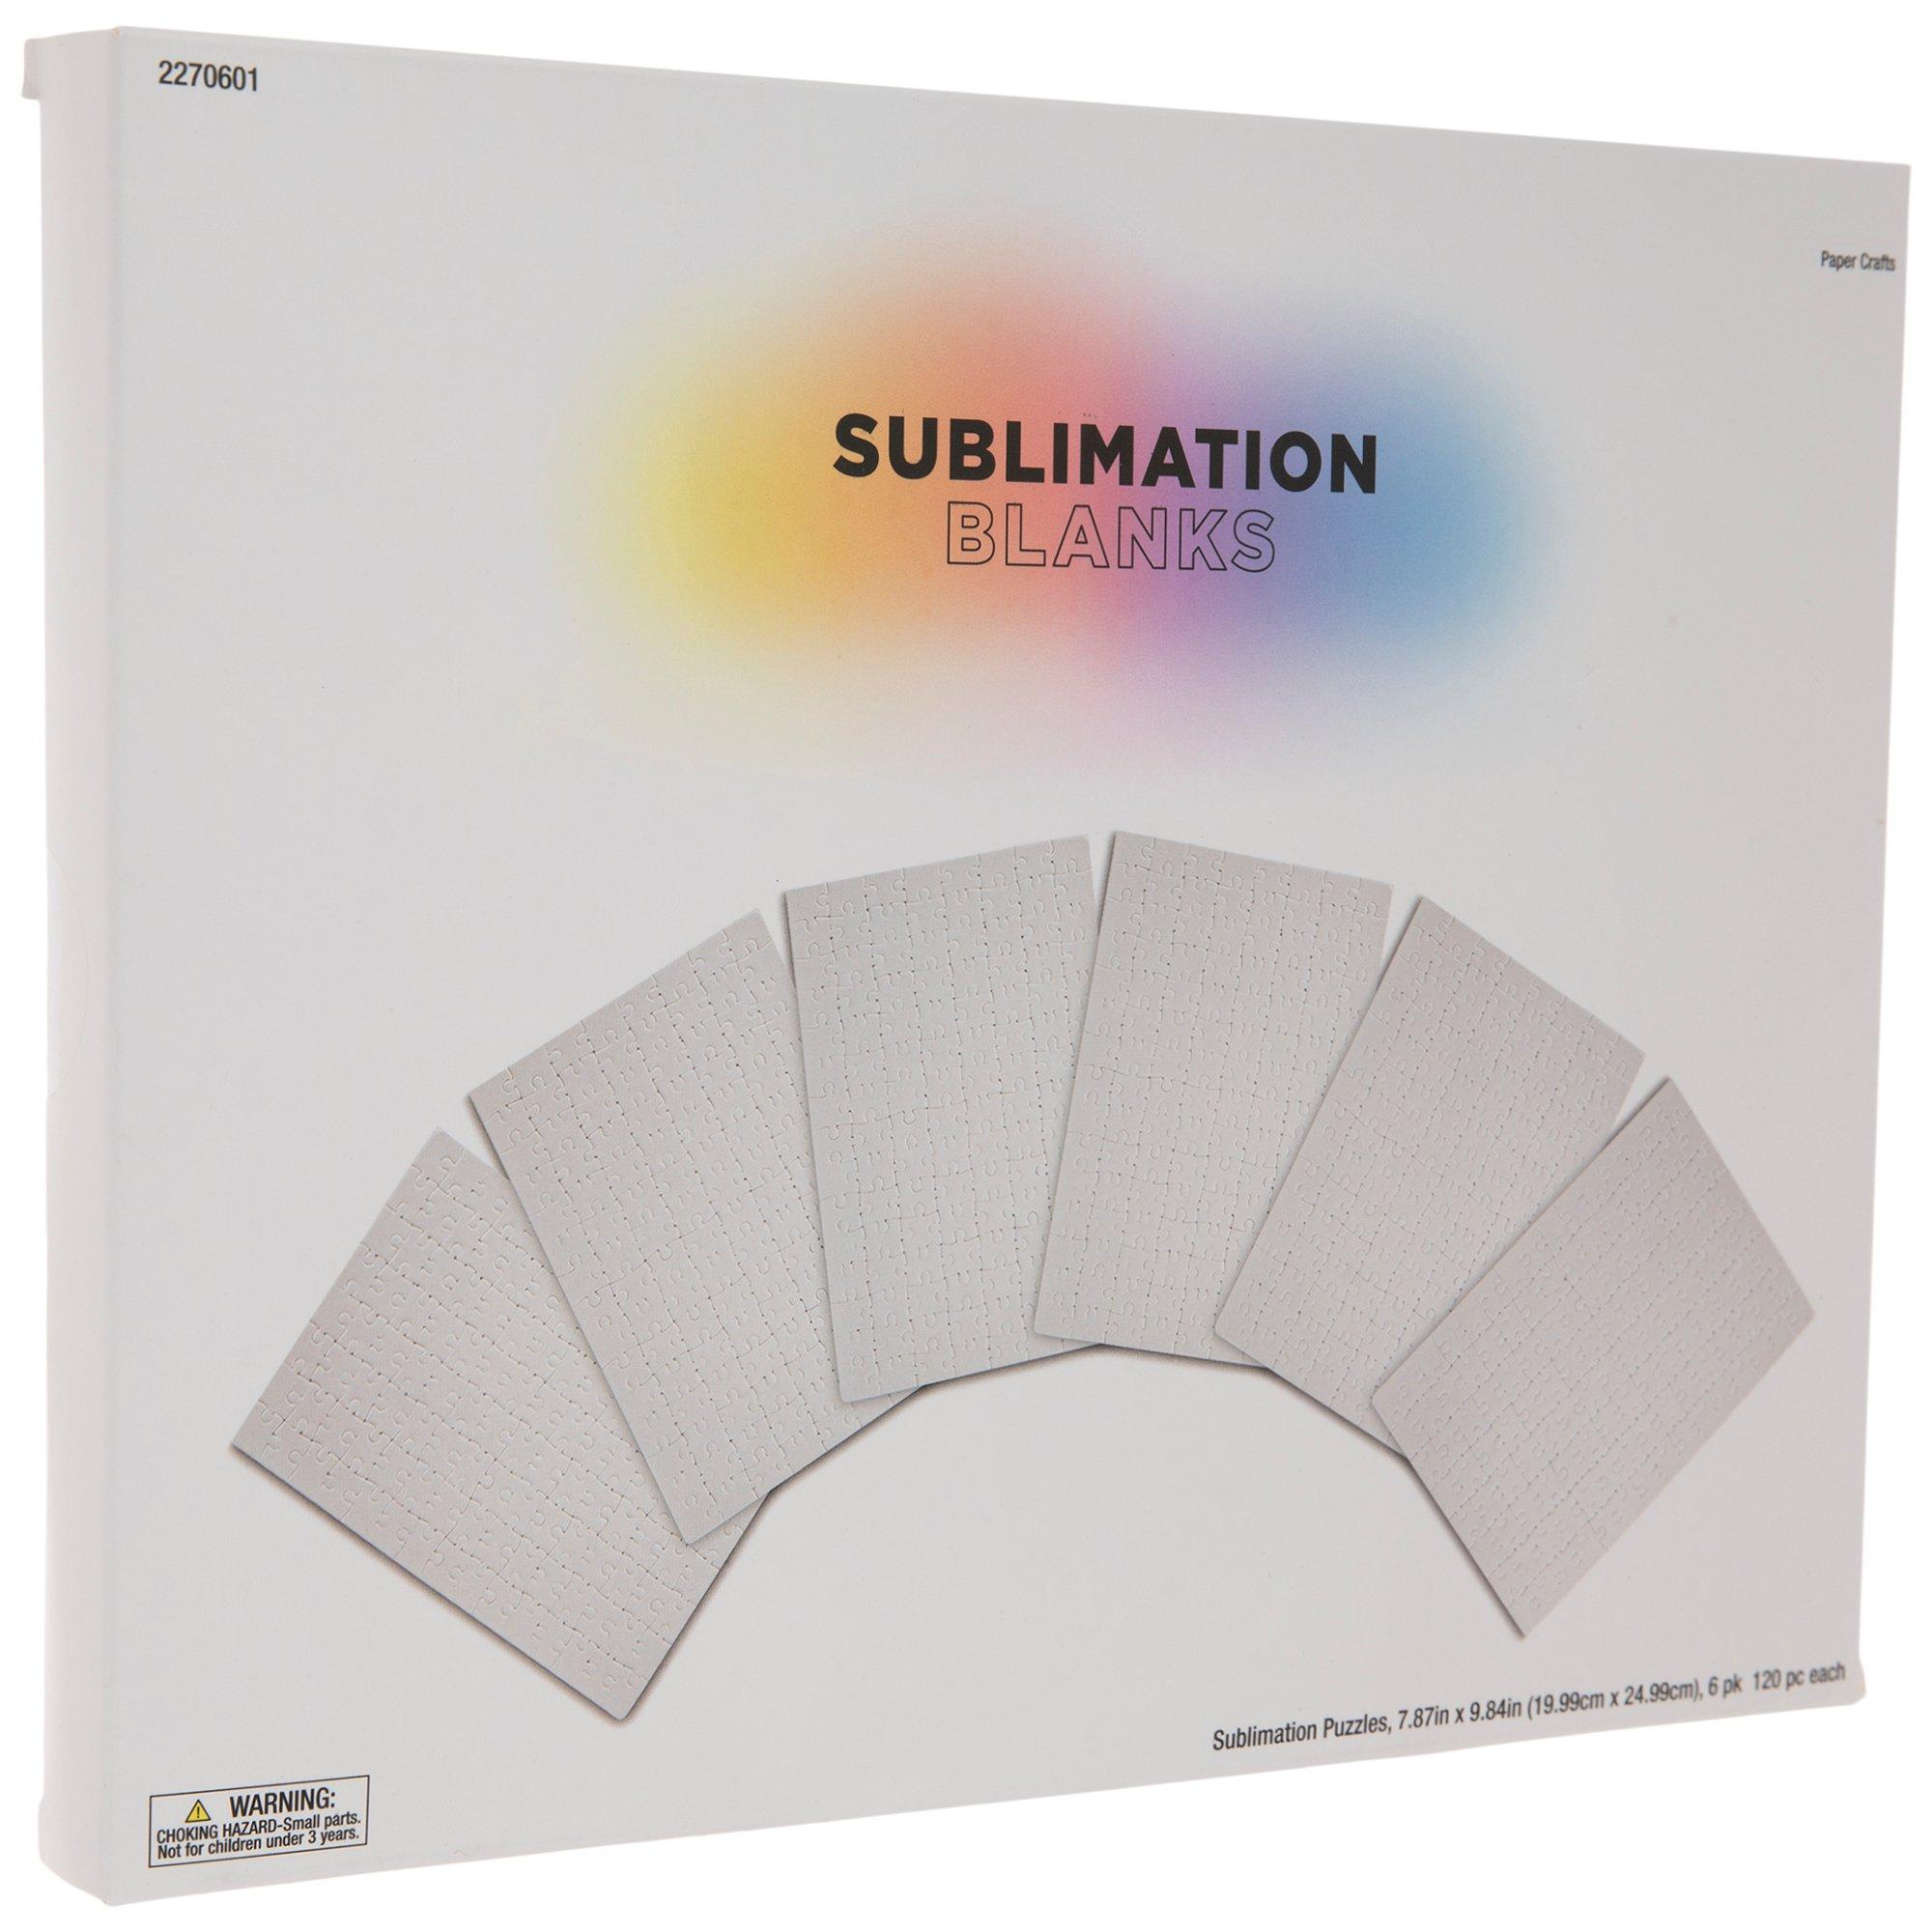 How to Sublimate a Puzzle From Start to Finish - Sublimation